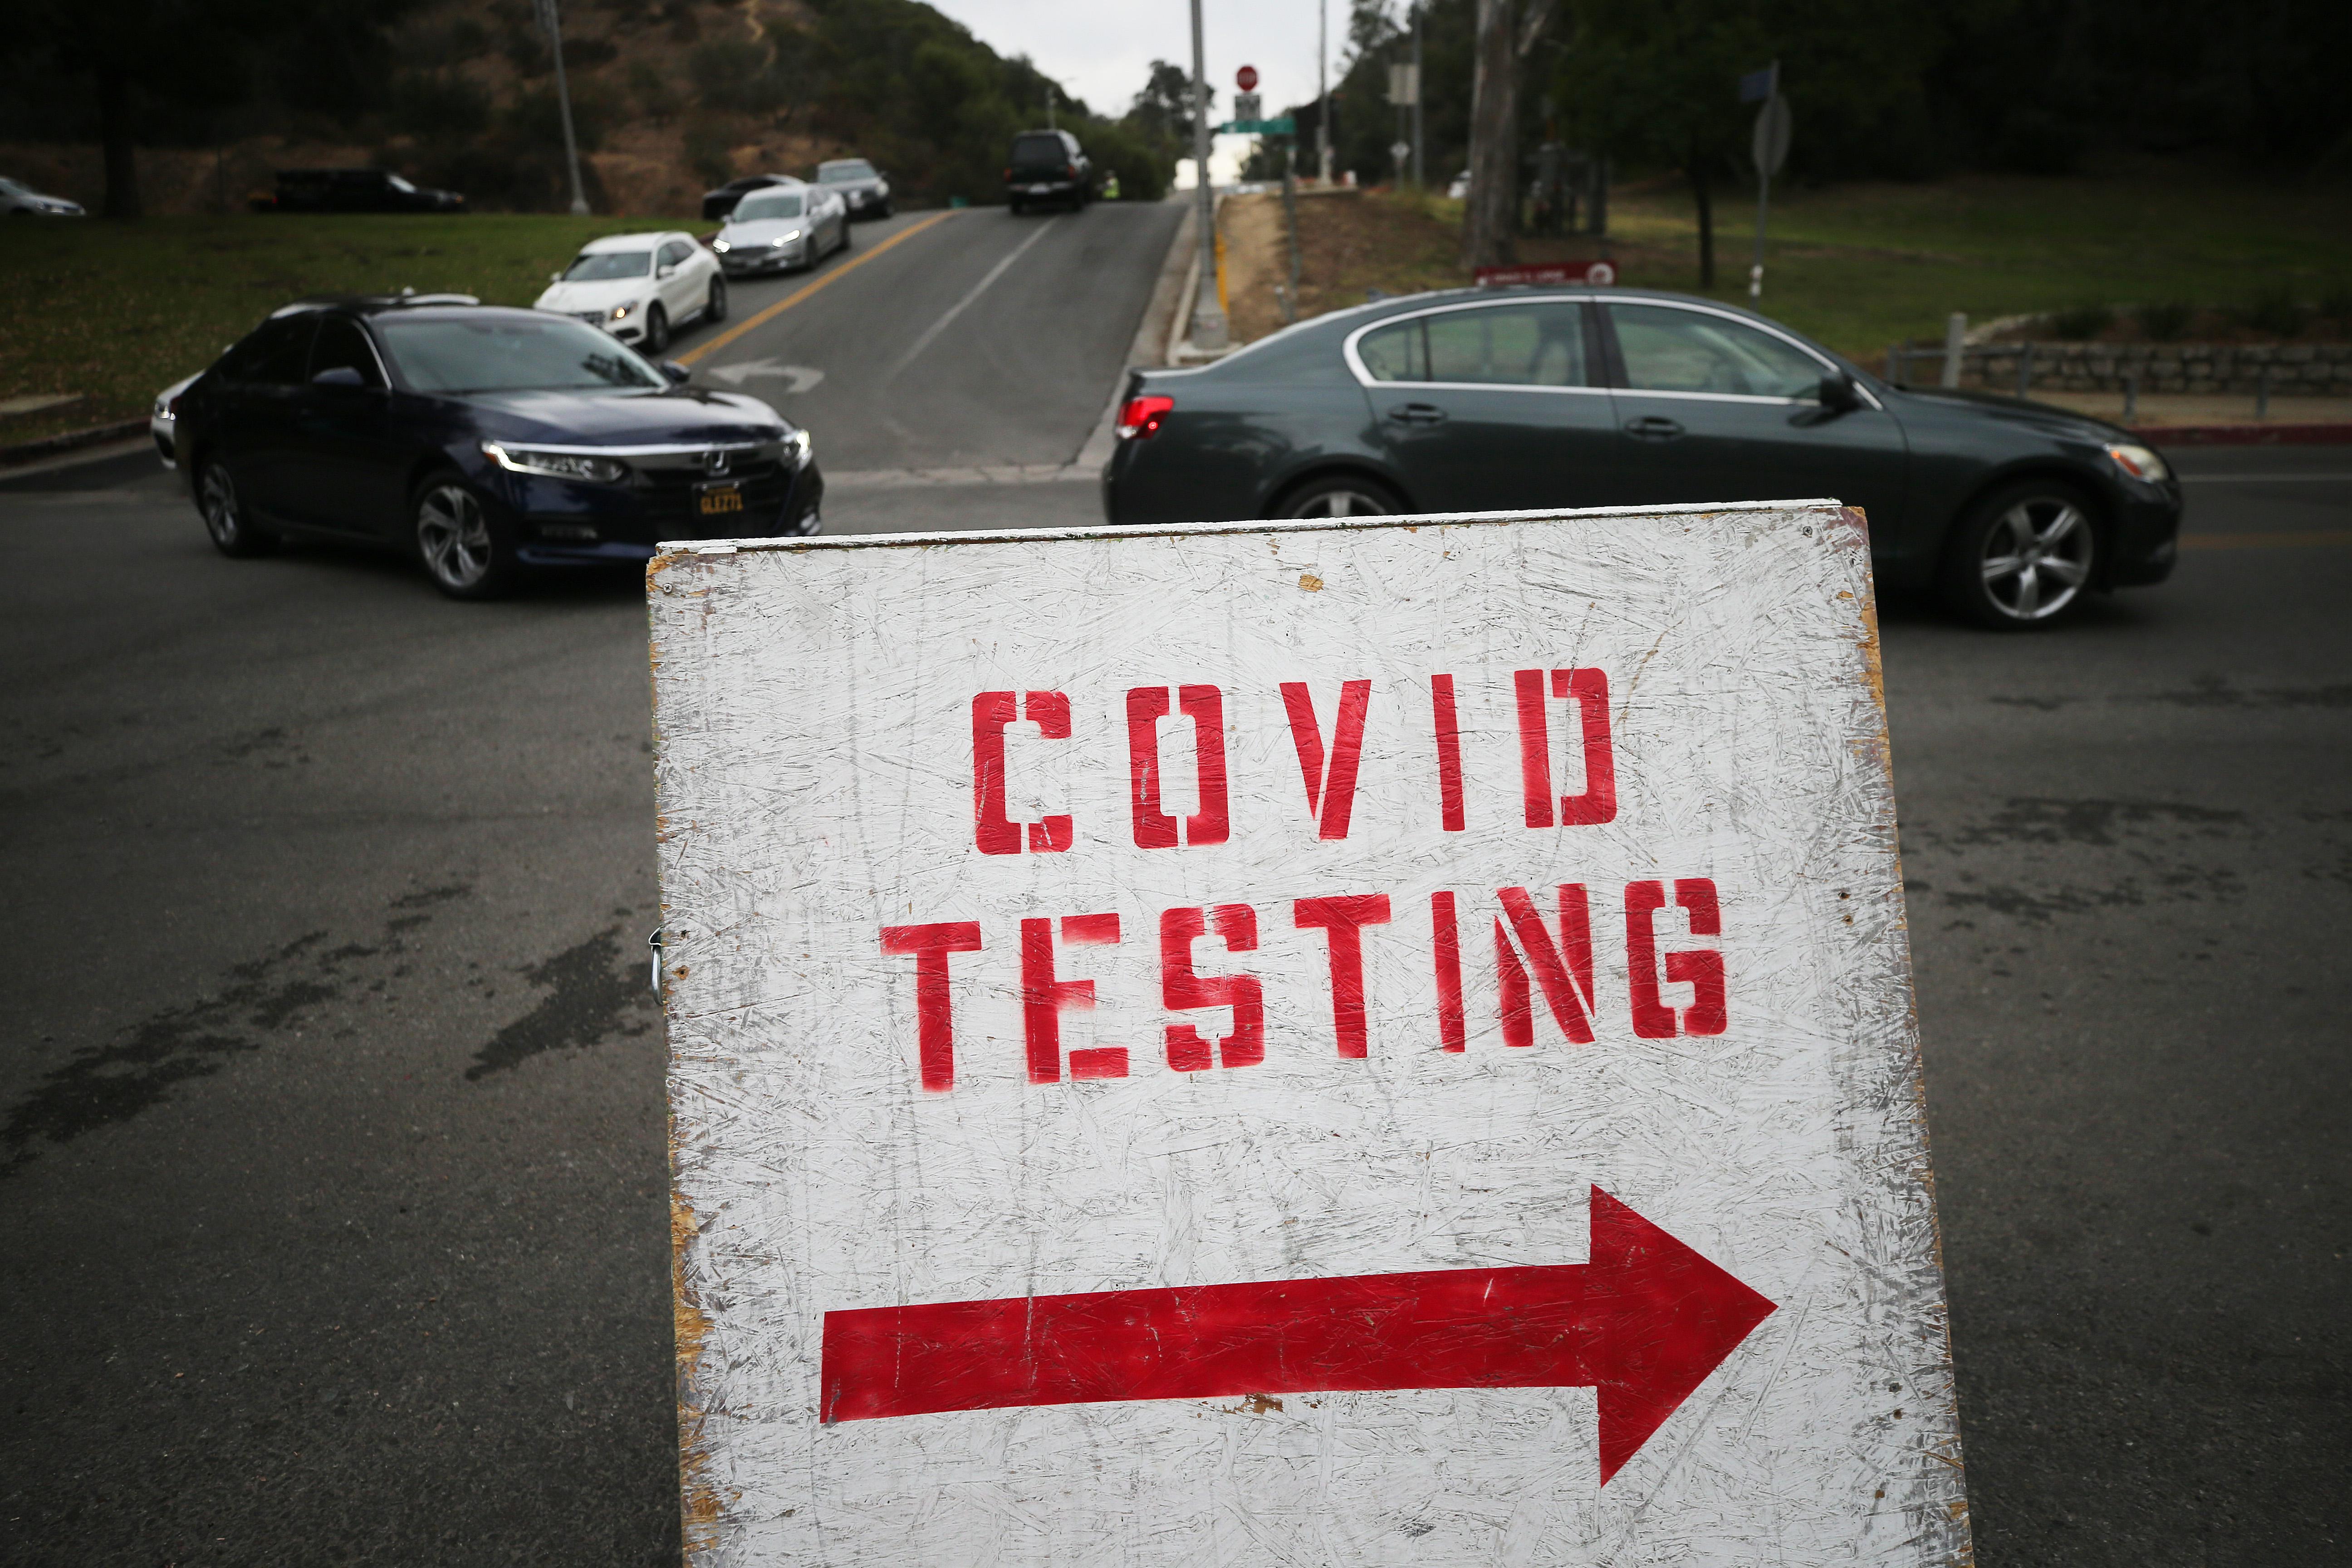 Cars lined up to enter the COVID-19 testing site at Dodger Stadium in Los Angeles, with a sign marked "COVID TESTING" in the foreground